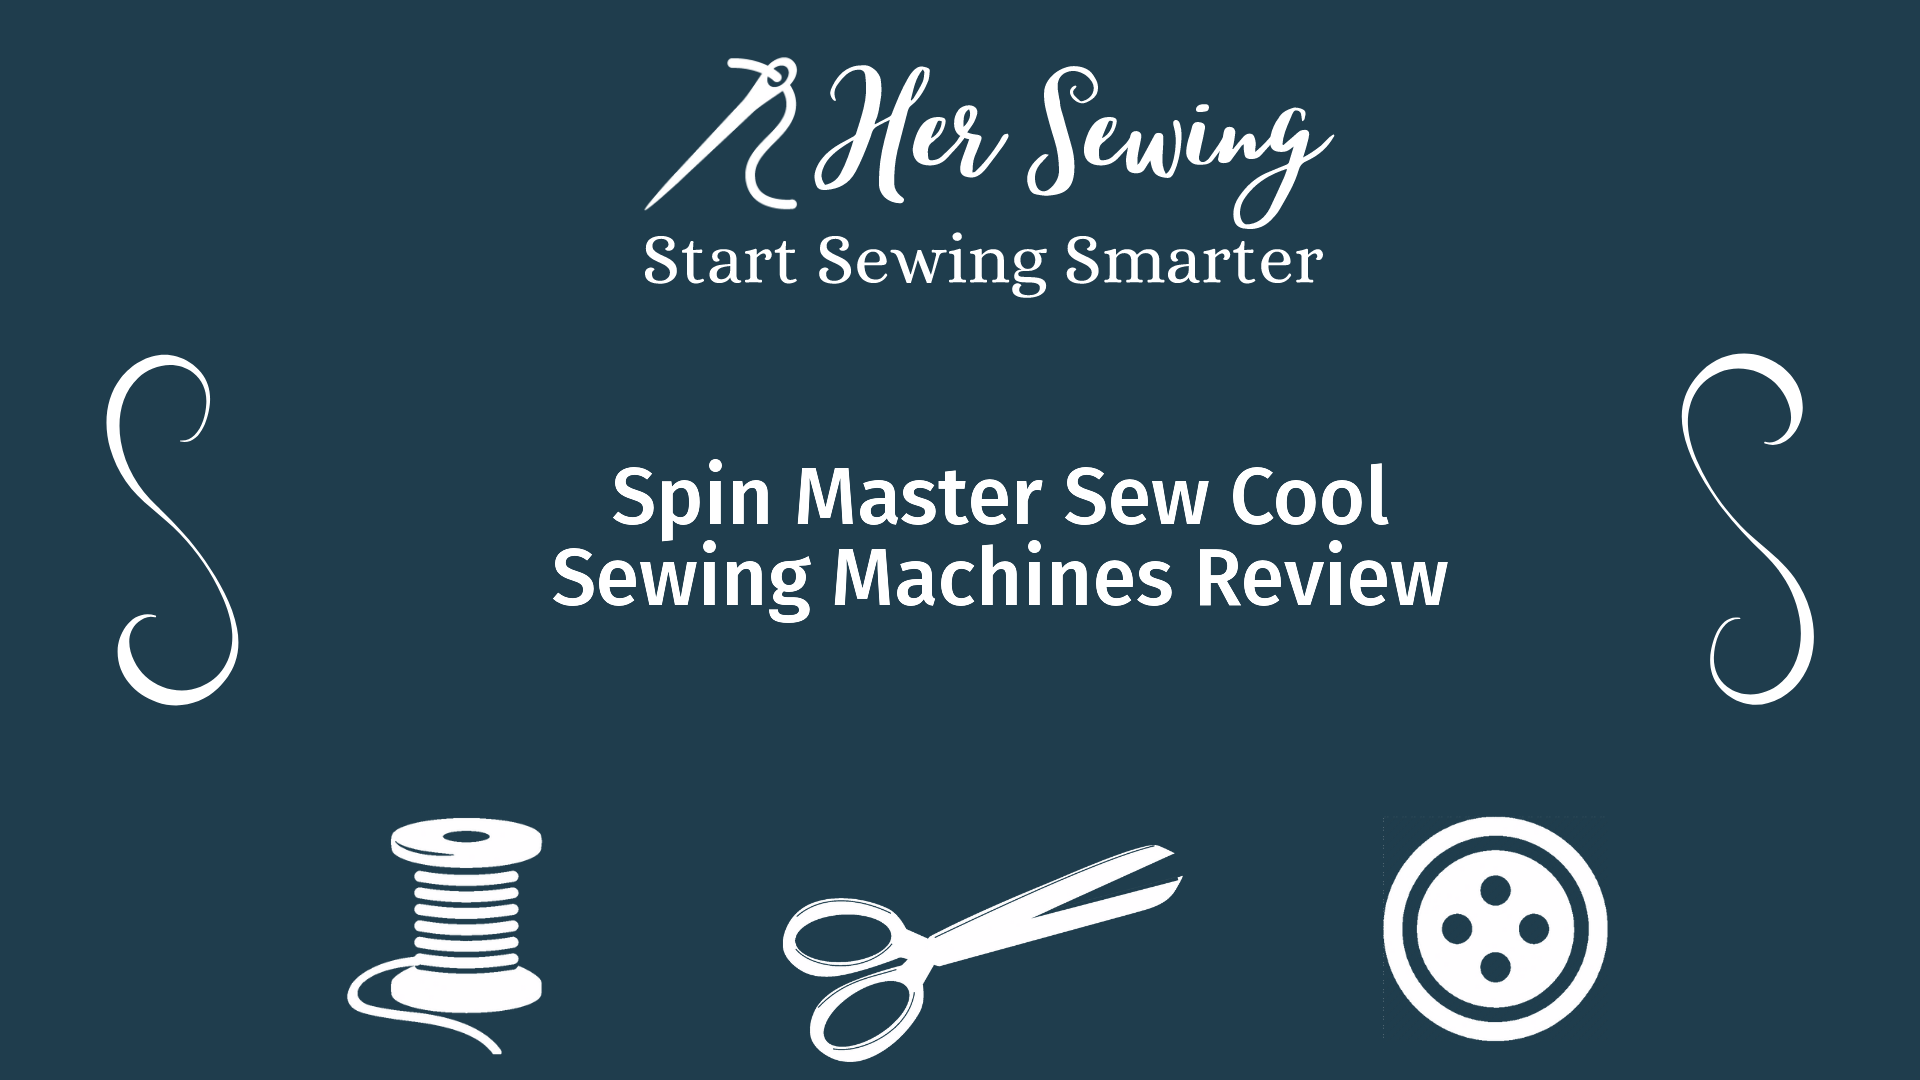 Spin Master Sew Cool Sewing Machines Review